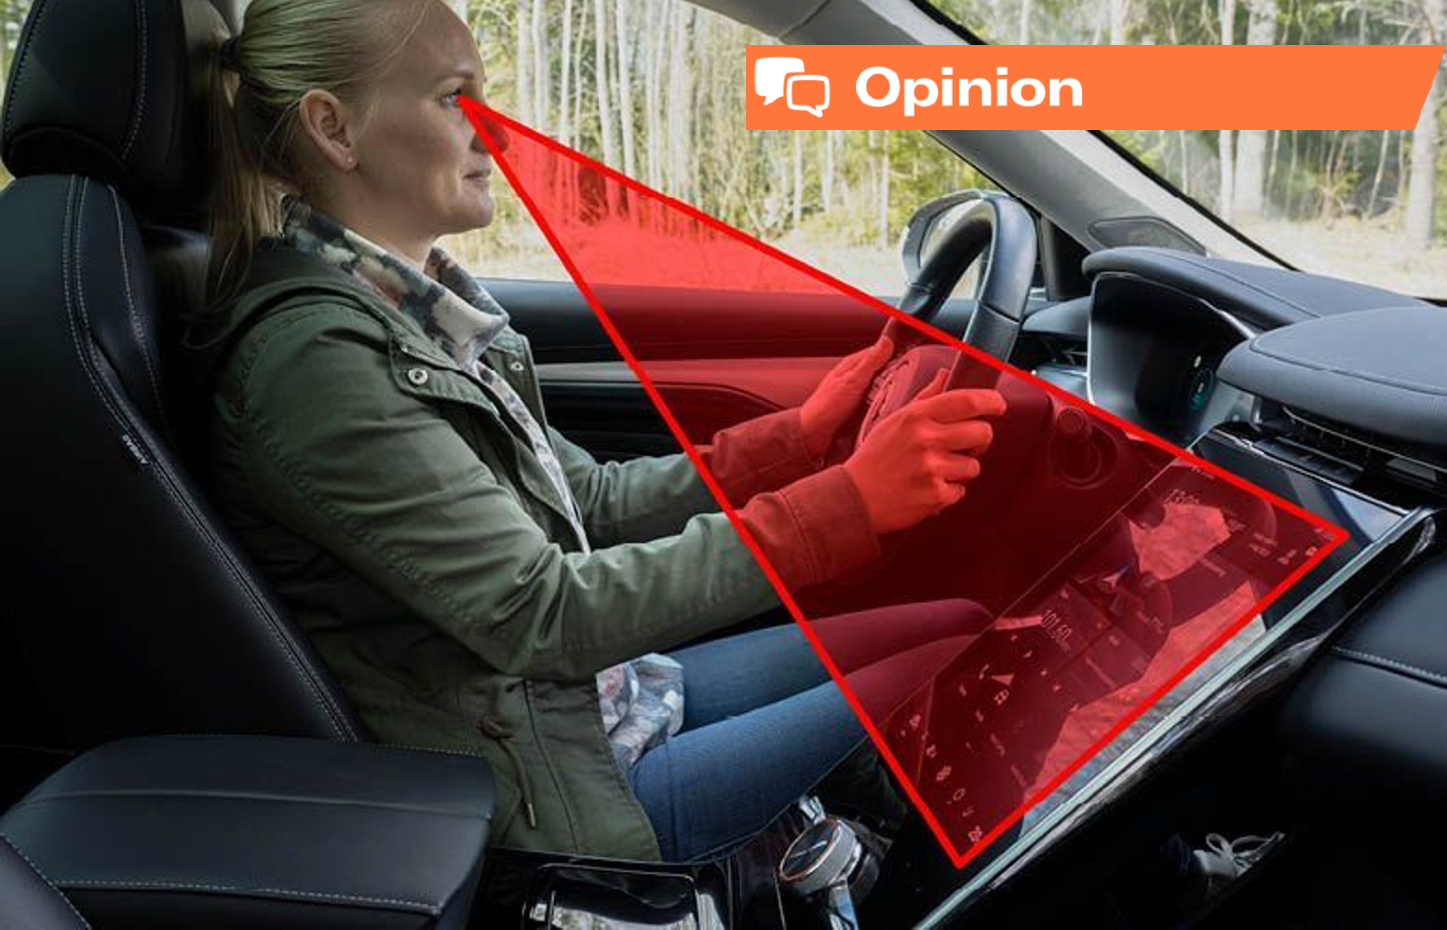 Opinion: Touchscreens in cars are a menace